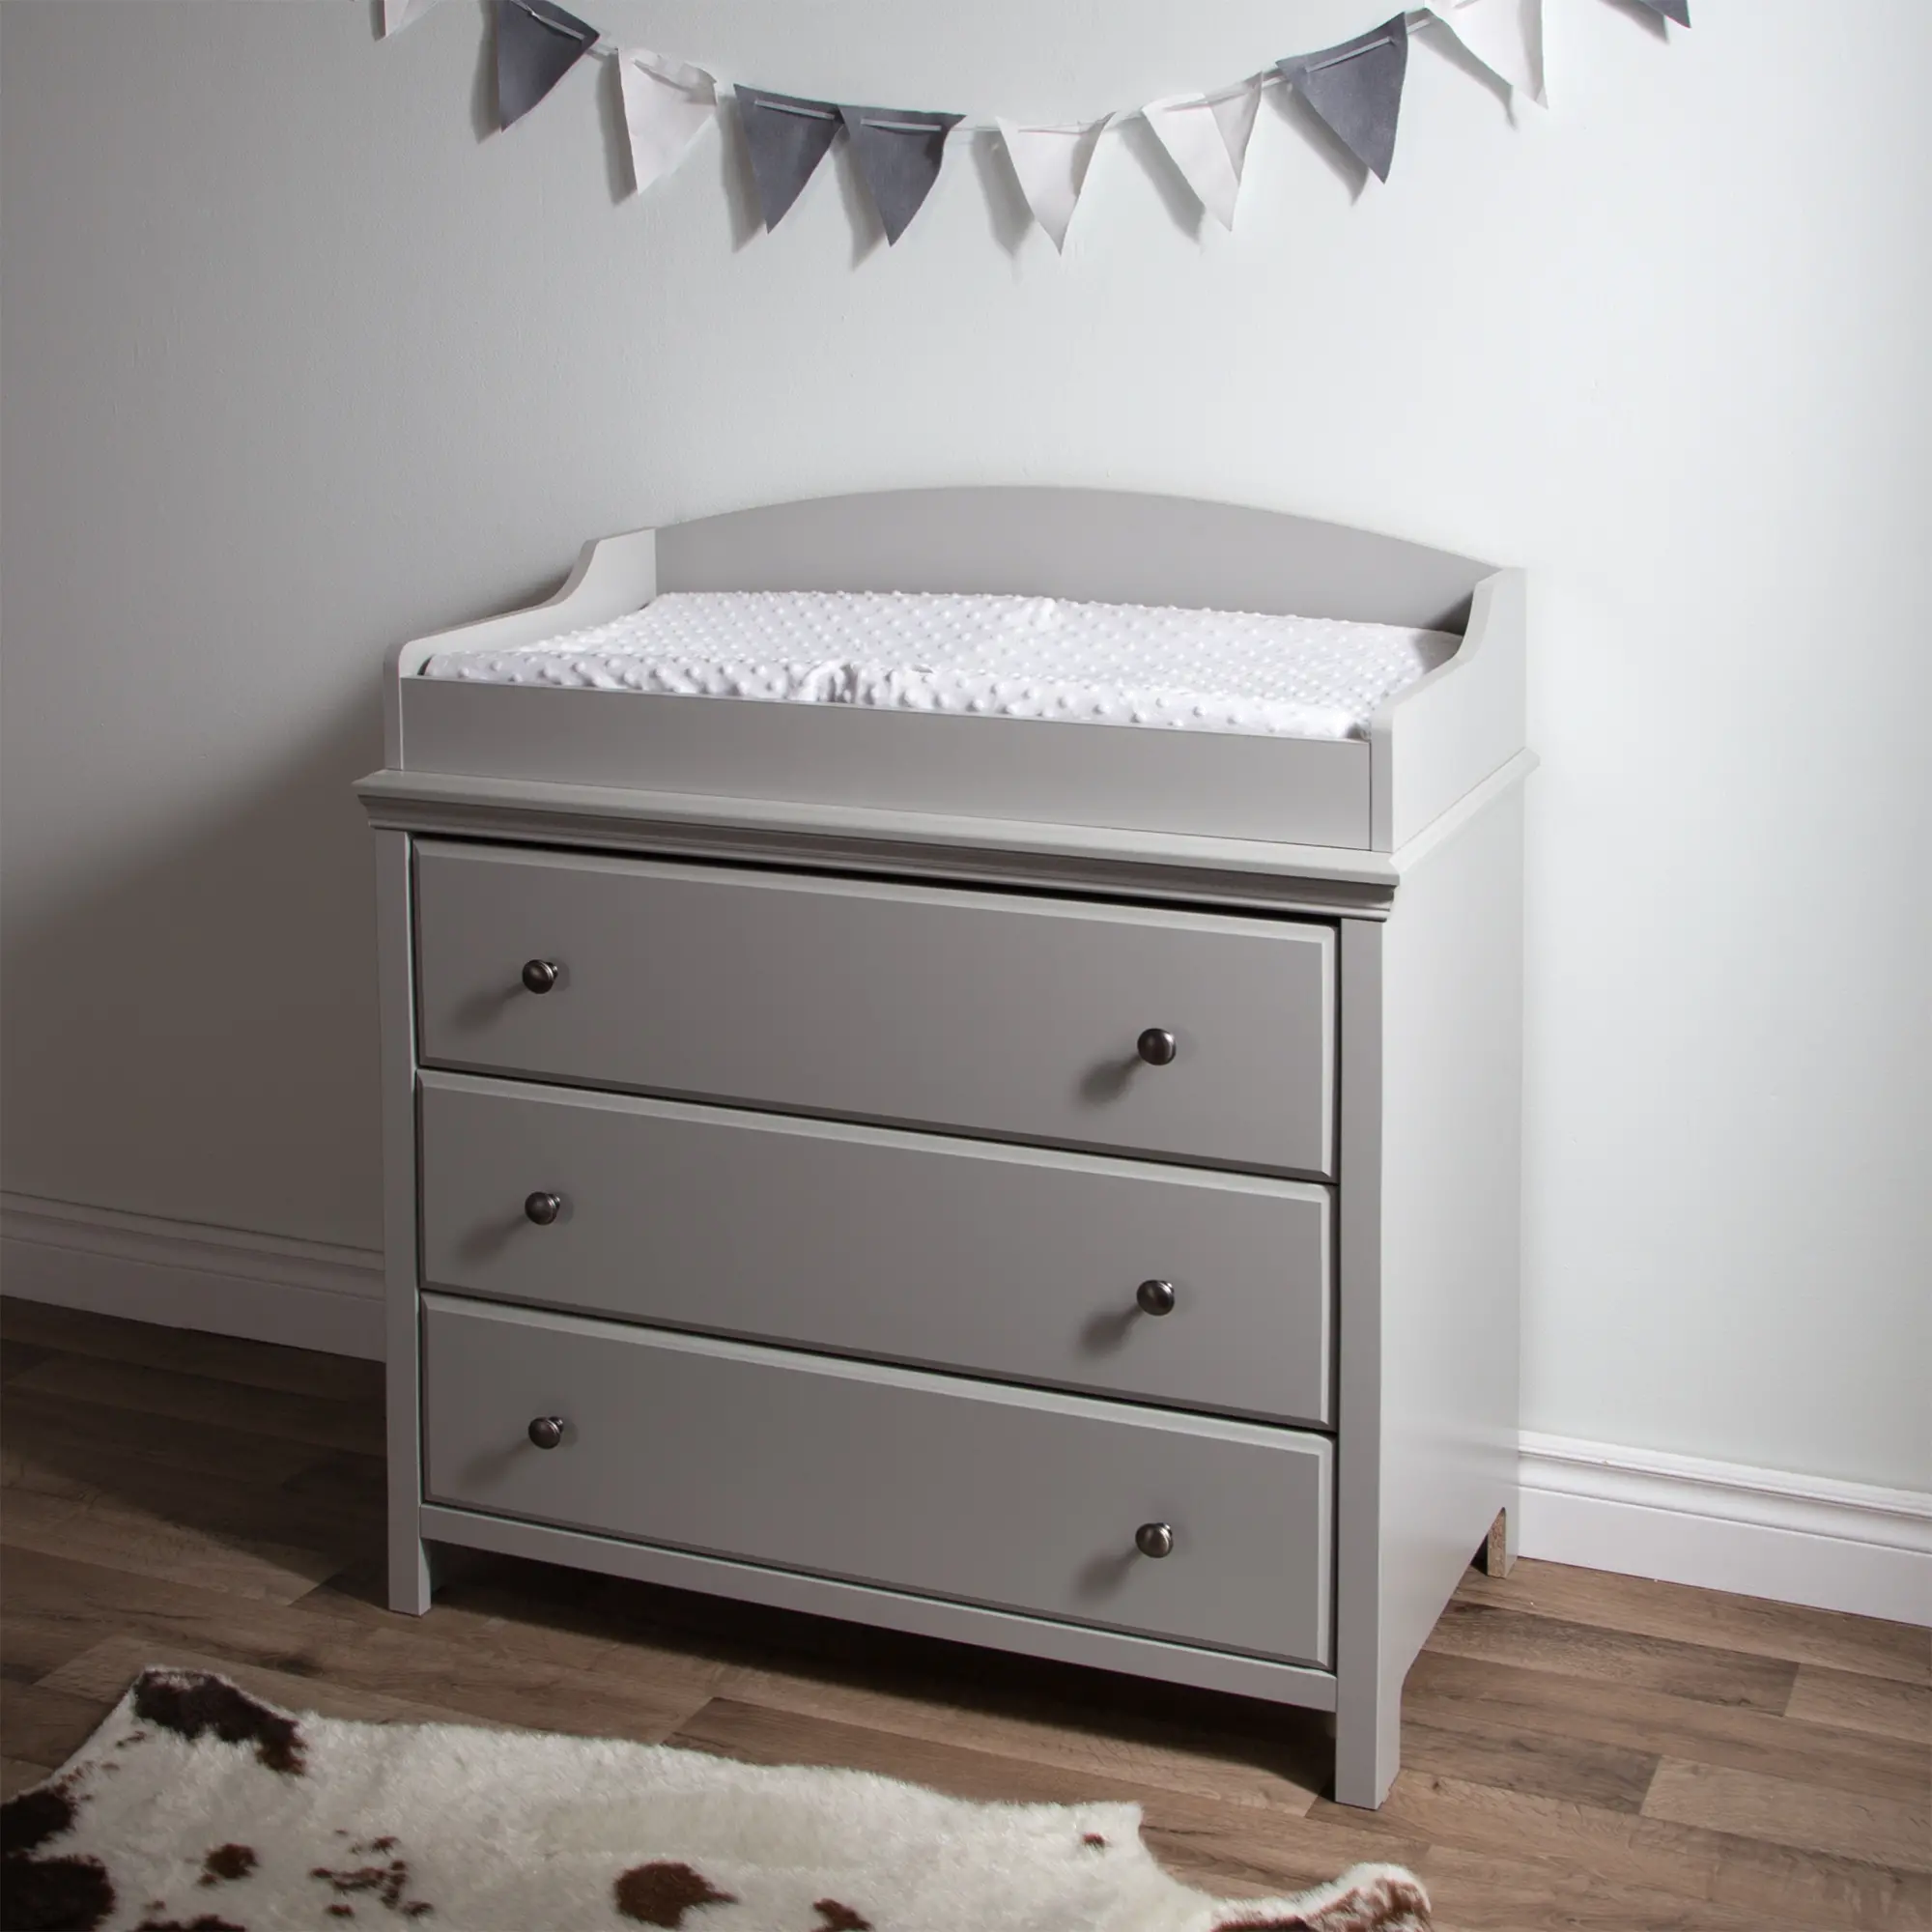 Cotton Candy Gray Changing Table with Drawers - South Shore